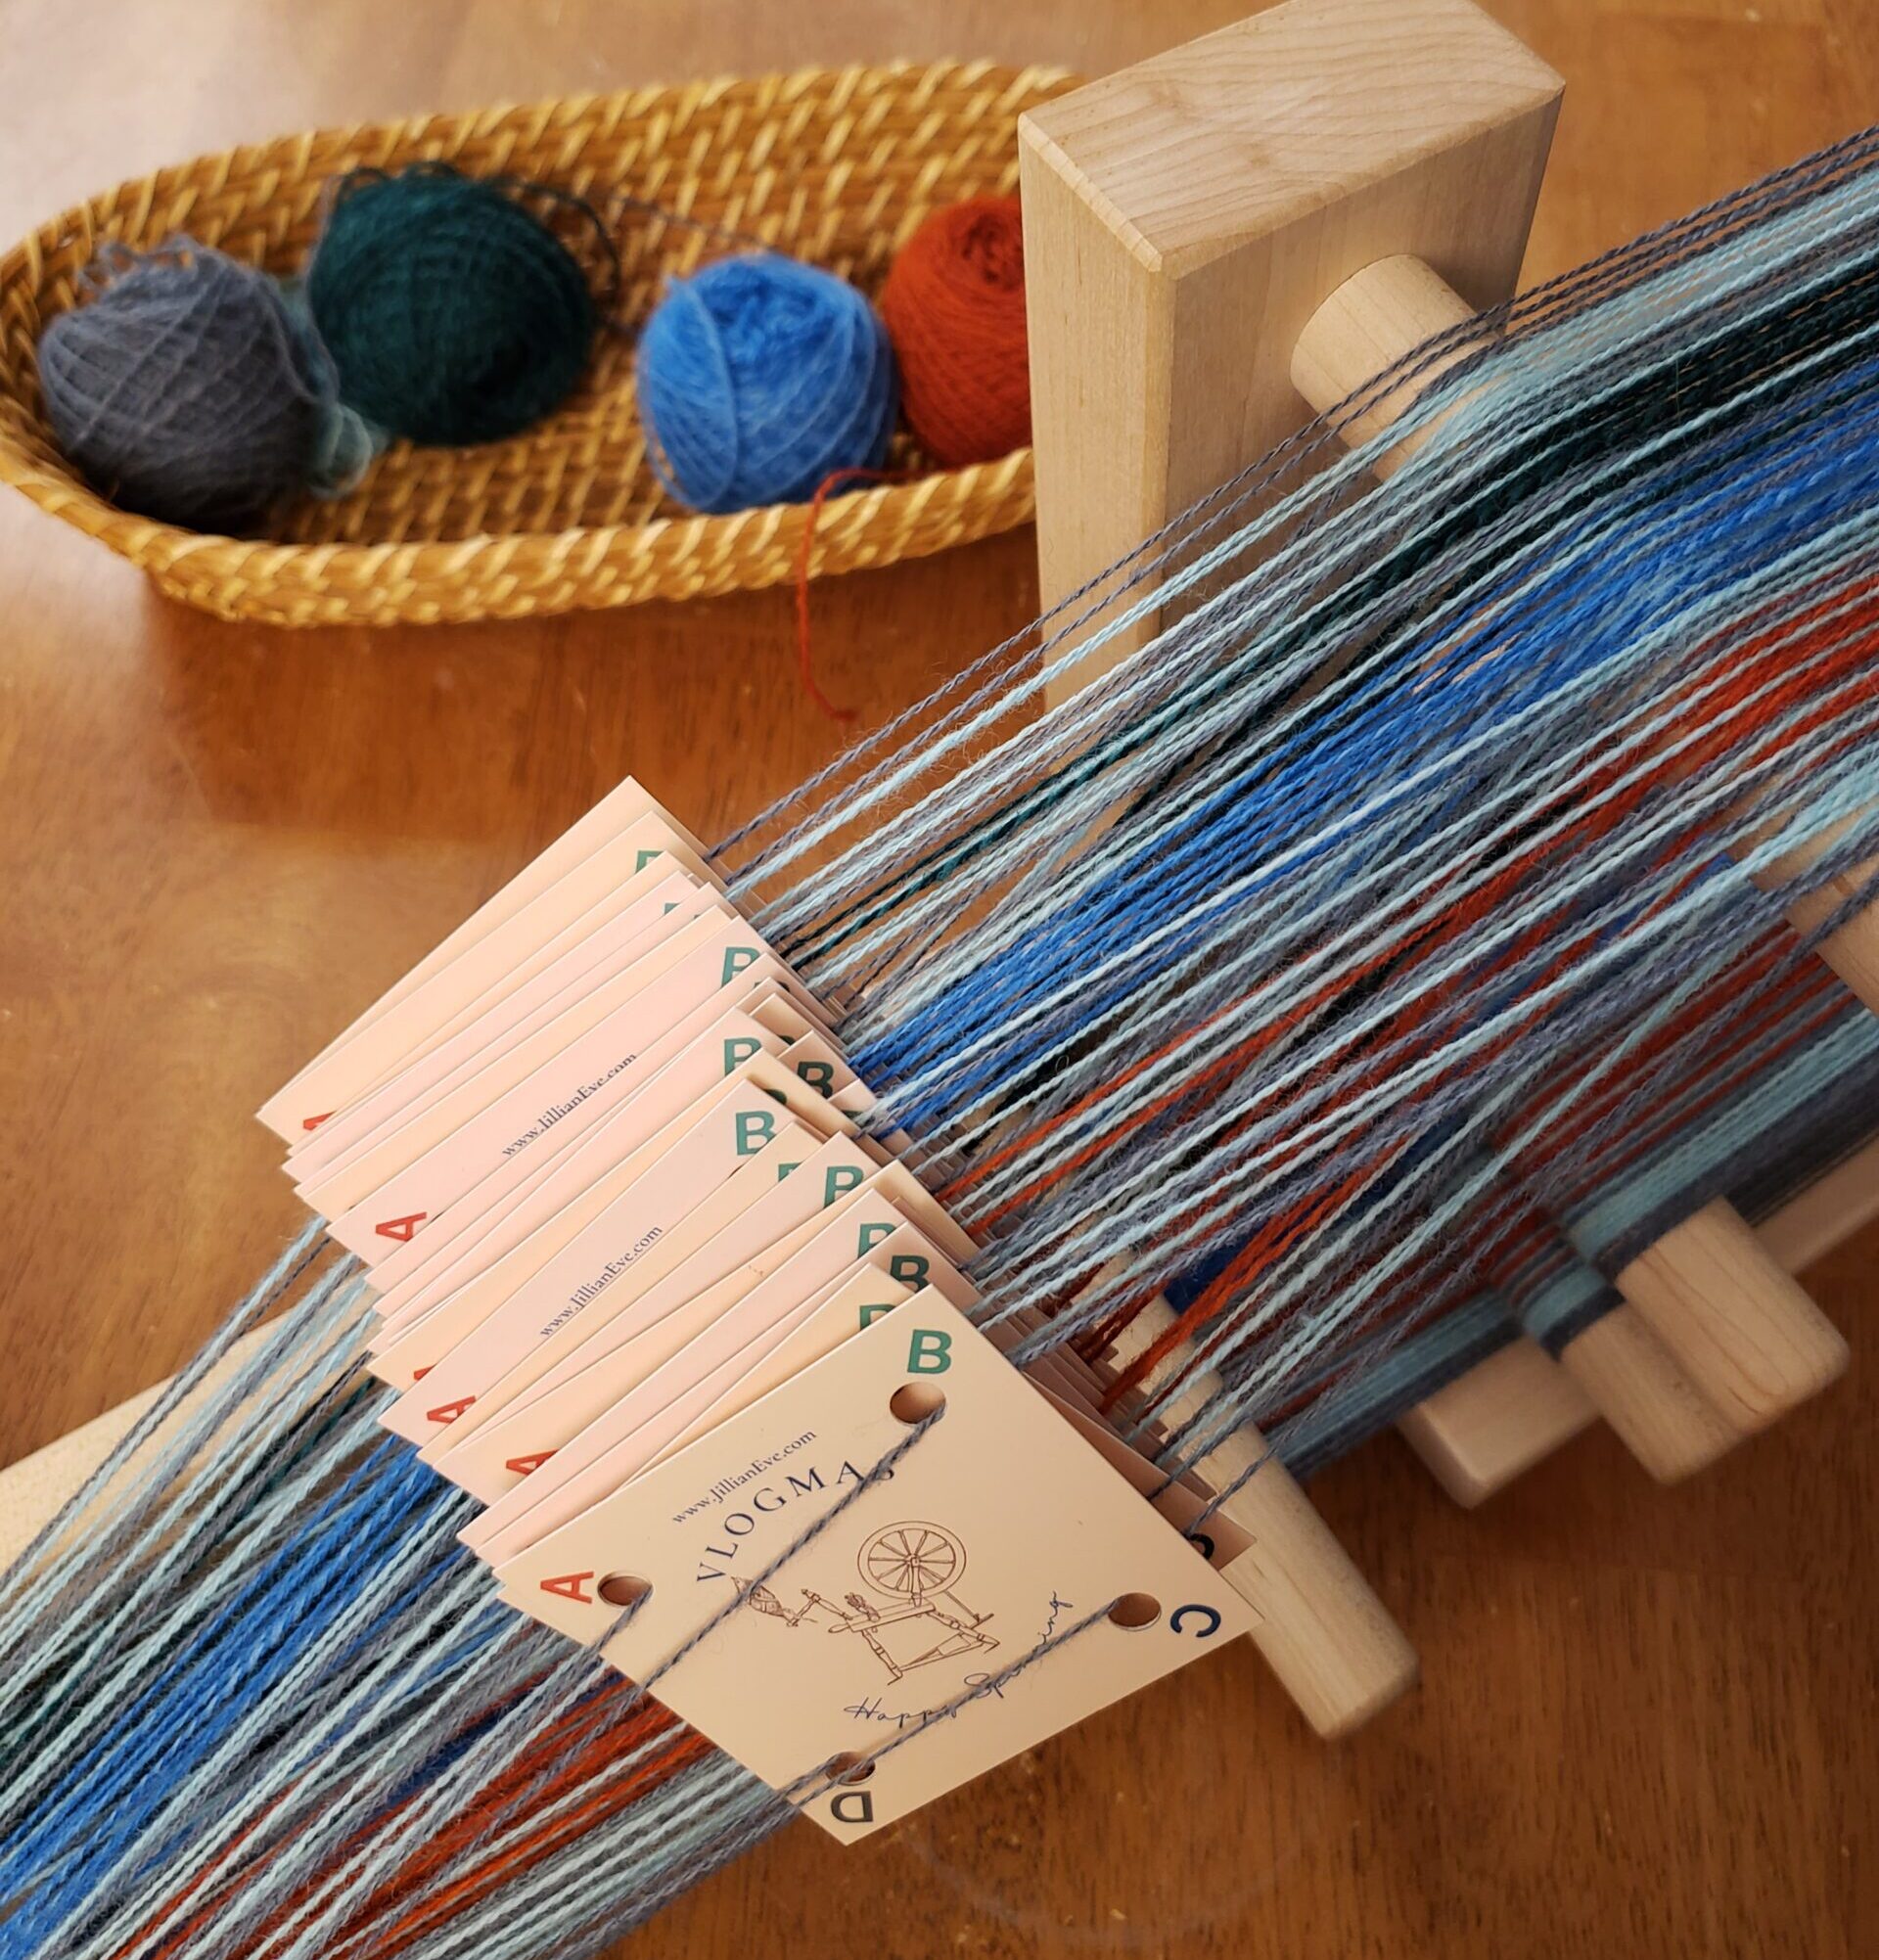 How to: Tablet Weaving with Handspun Yarn